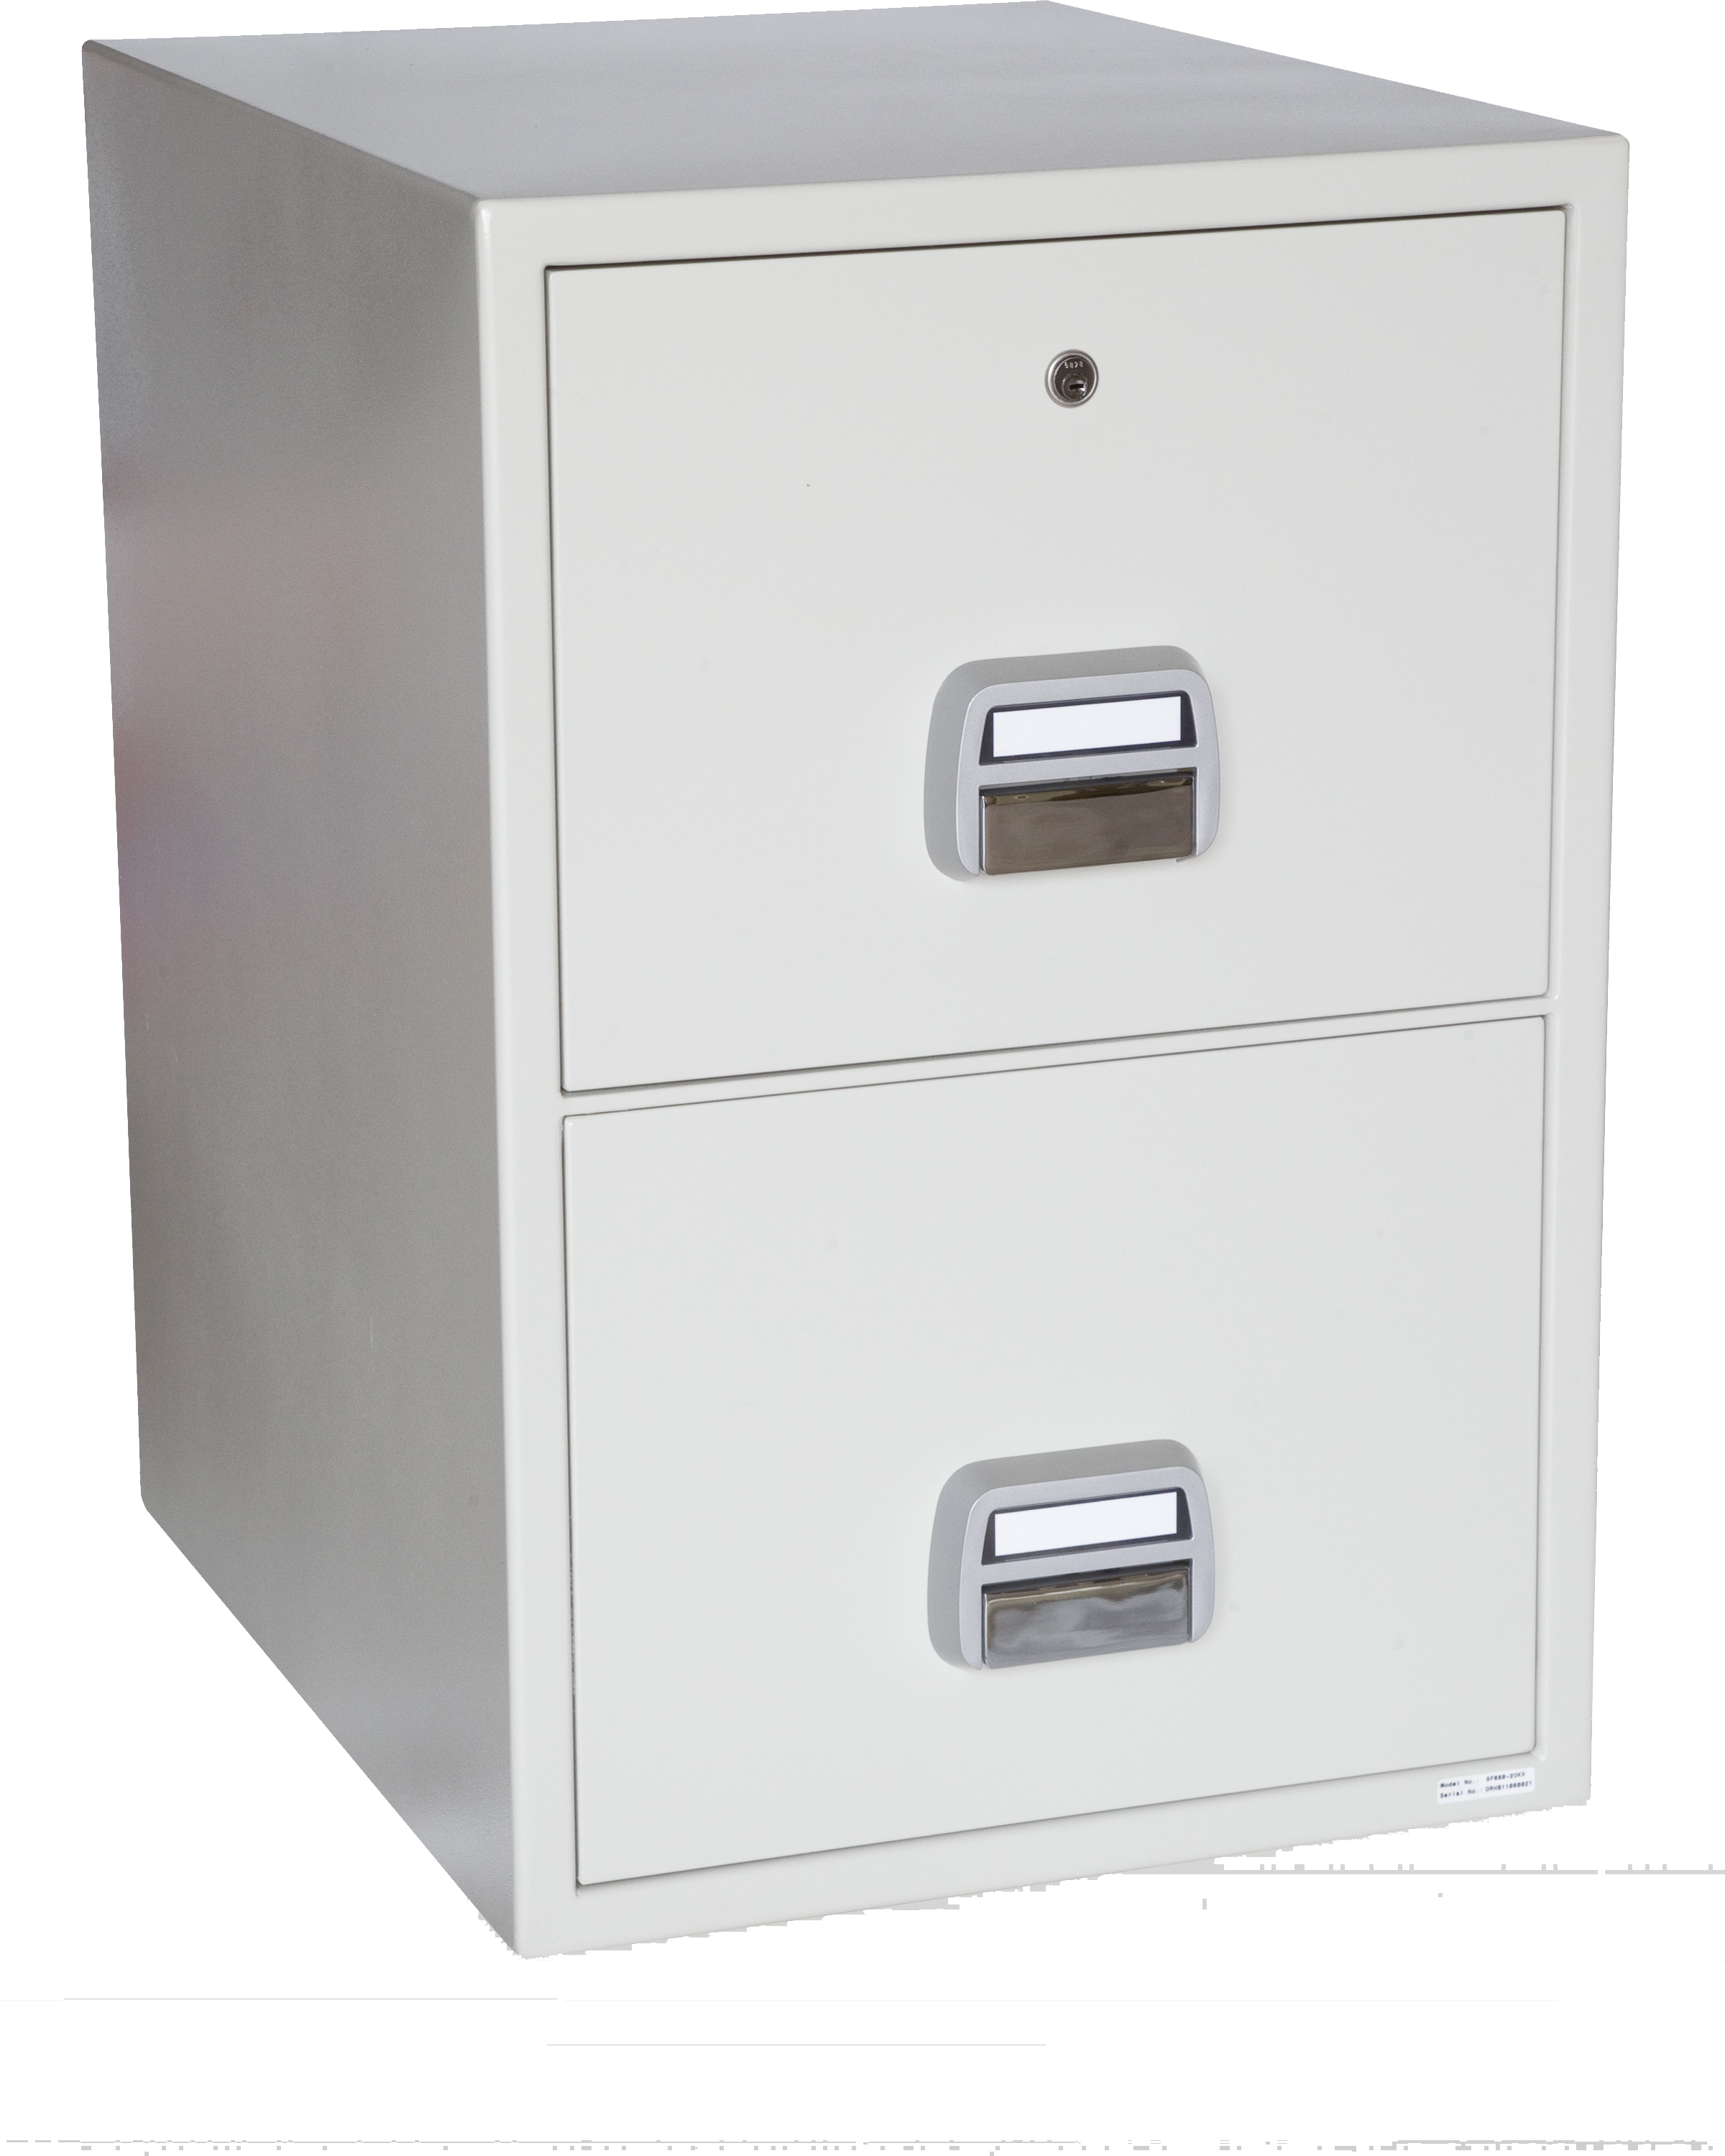 The De Raat Protector SF0680-2DK is a 2 drawer fire resistant filing cabinet with 90 minutes fire protection for paper records. It offers great capacity and makes a good office fire filer. Furnished with a secure key lock and supplied with 2 keys.